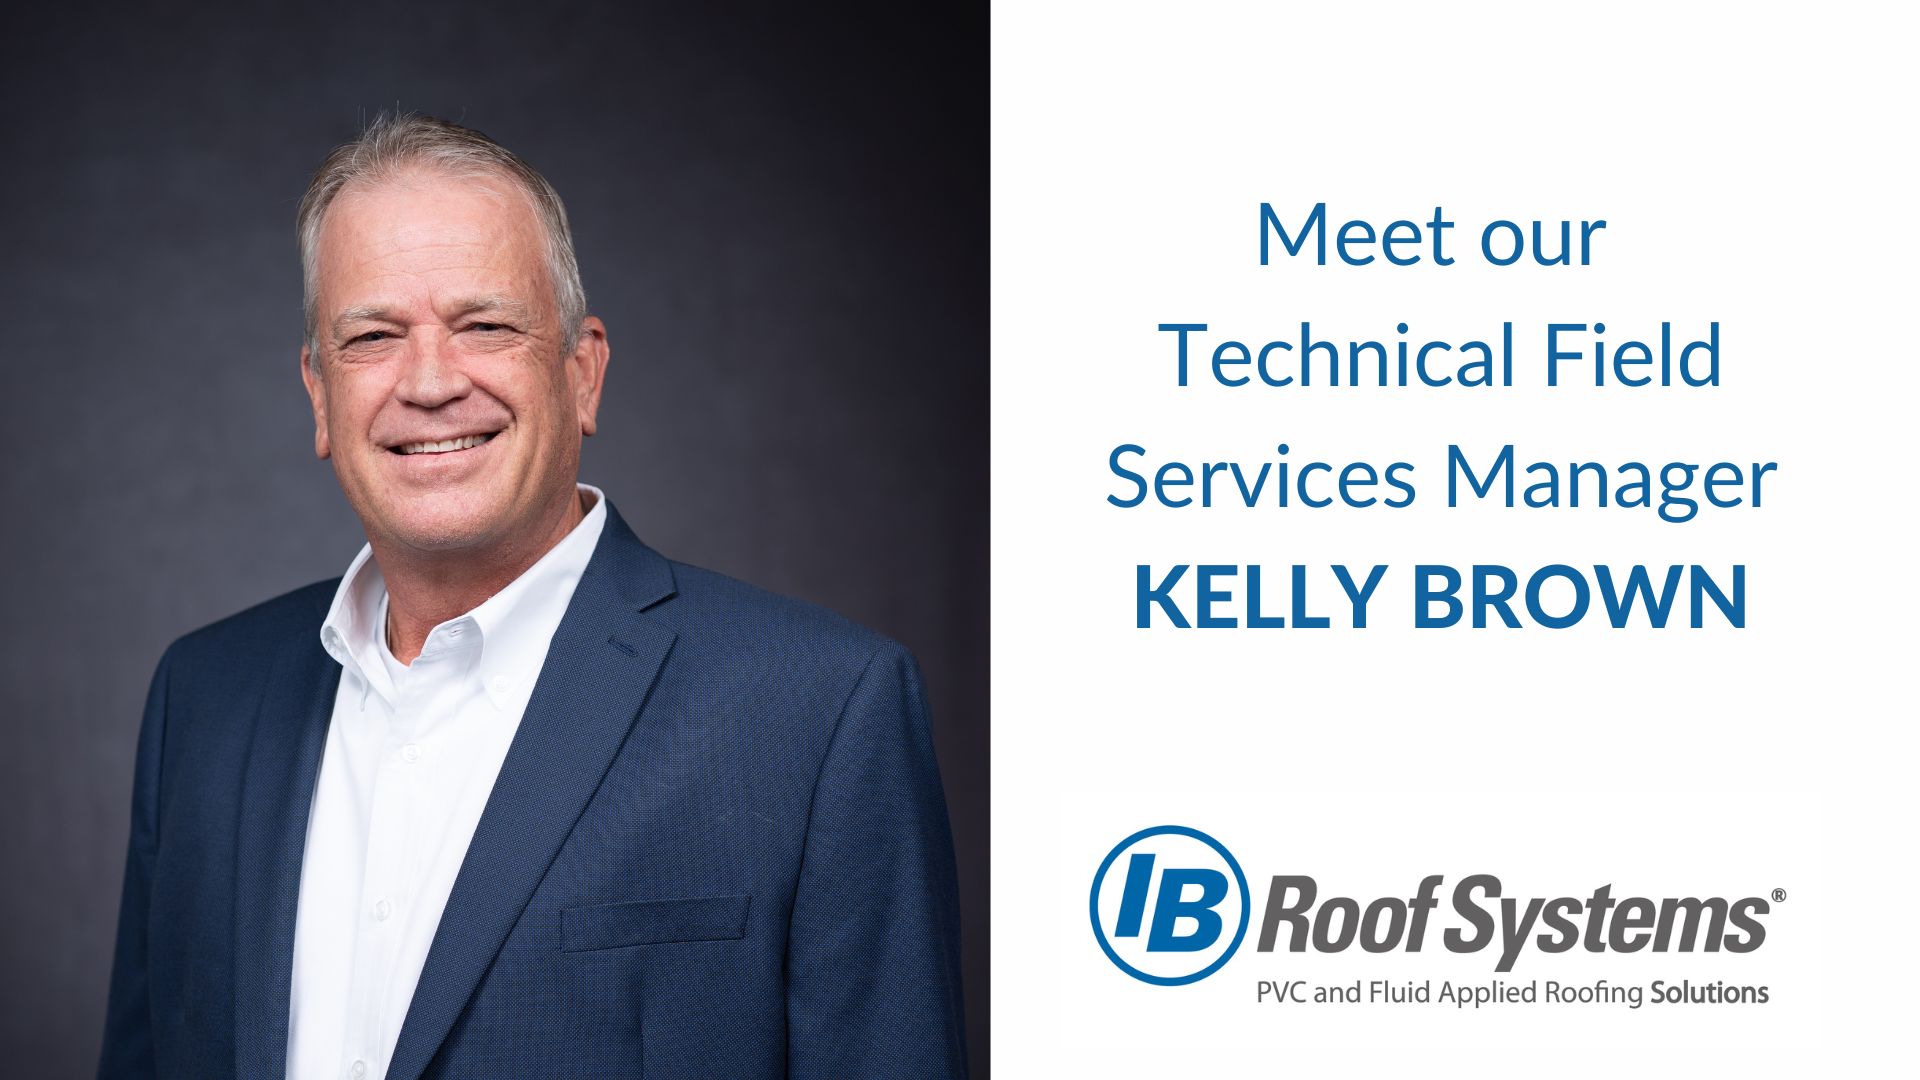 Kelly Brown has been promoted to the Technical Field Services Manager at IB Roof Systems.